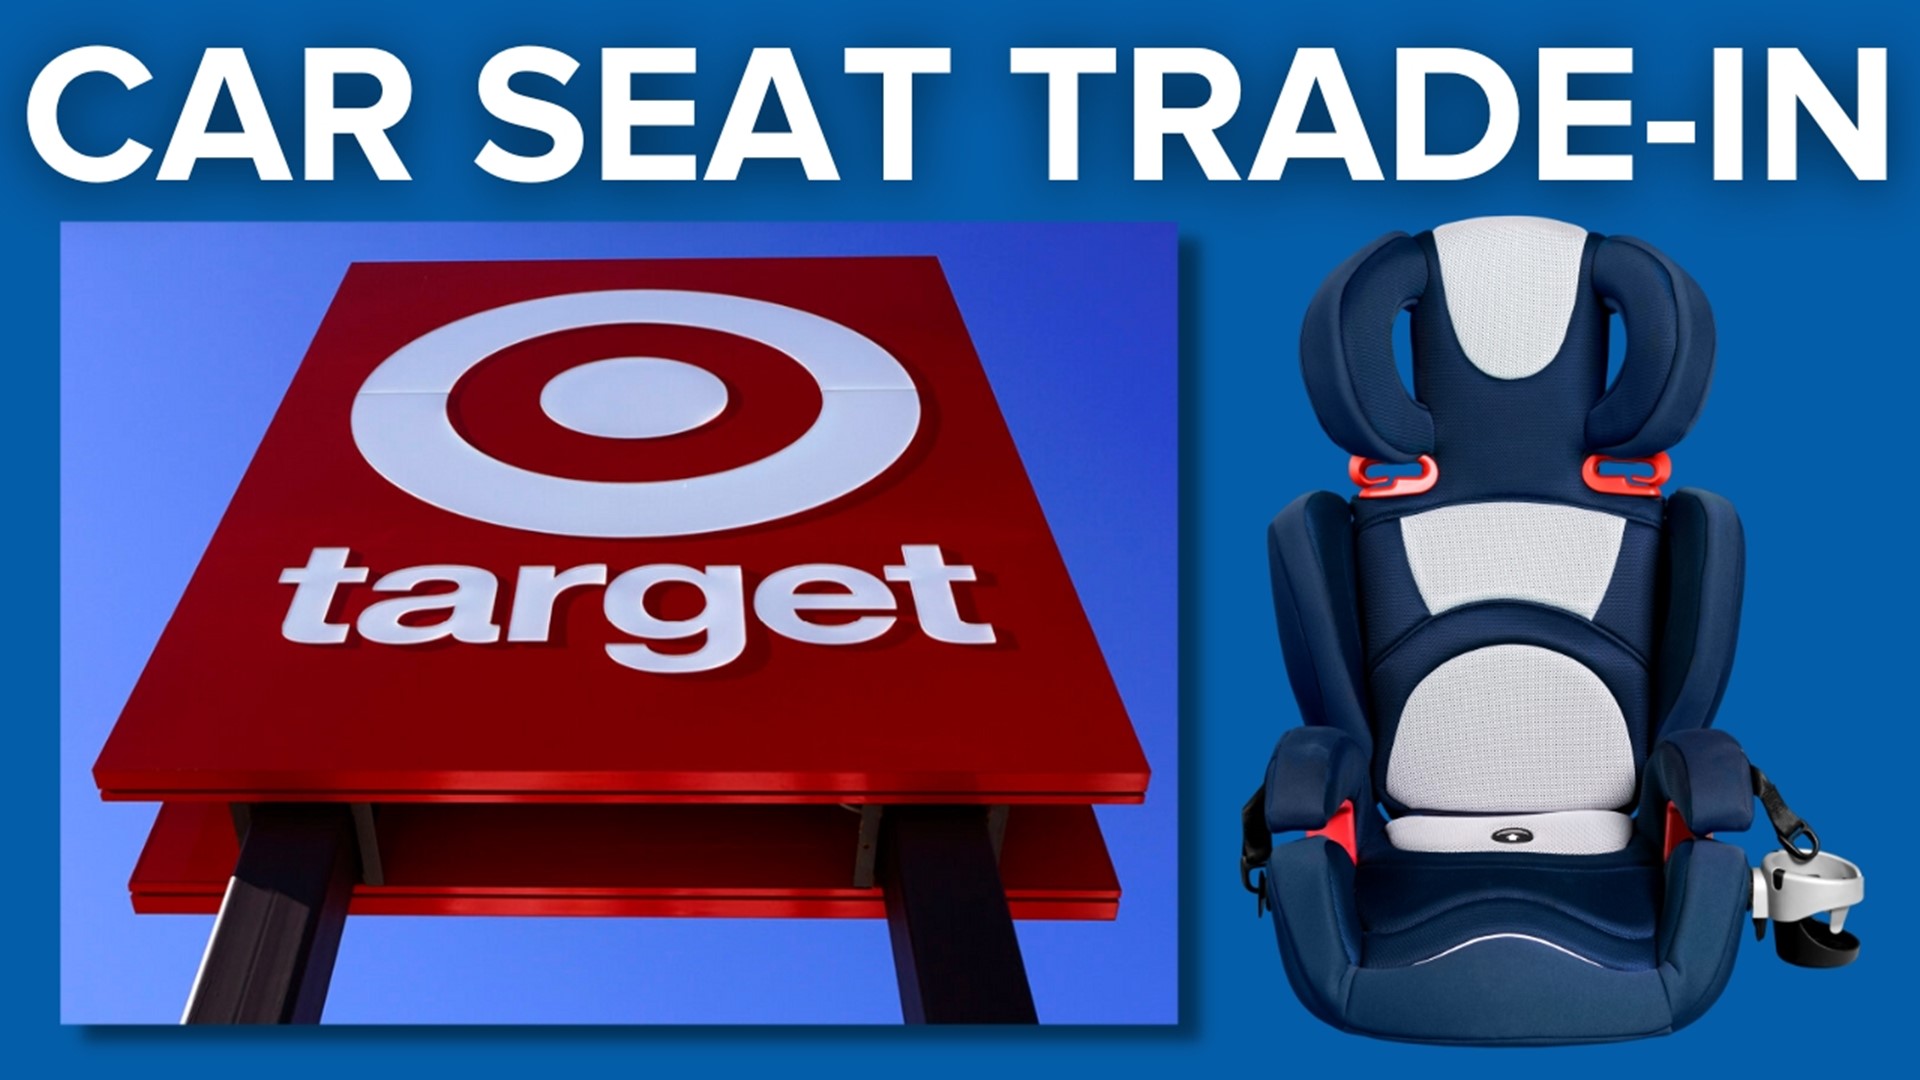 Drop off an old, expired, or damaged car seat and get a coupon good for 20% off select baby gear.